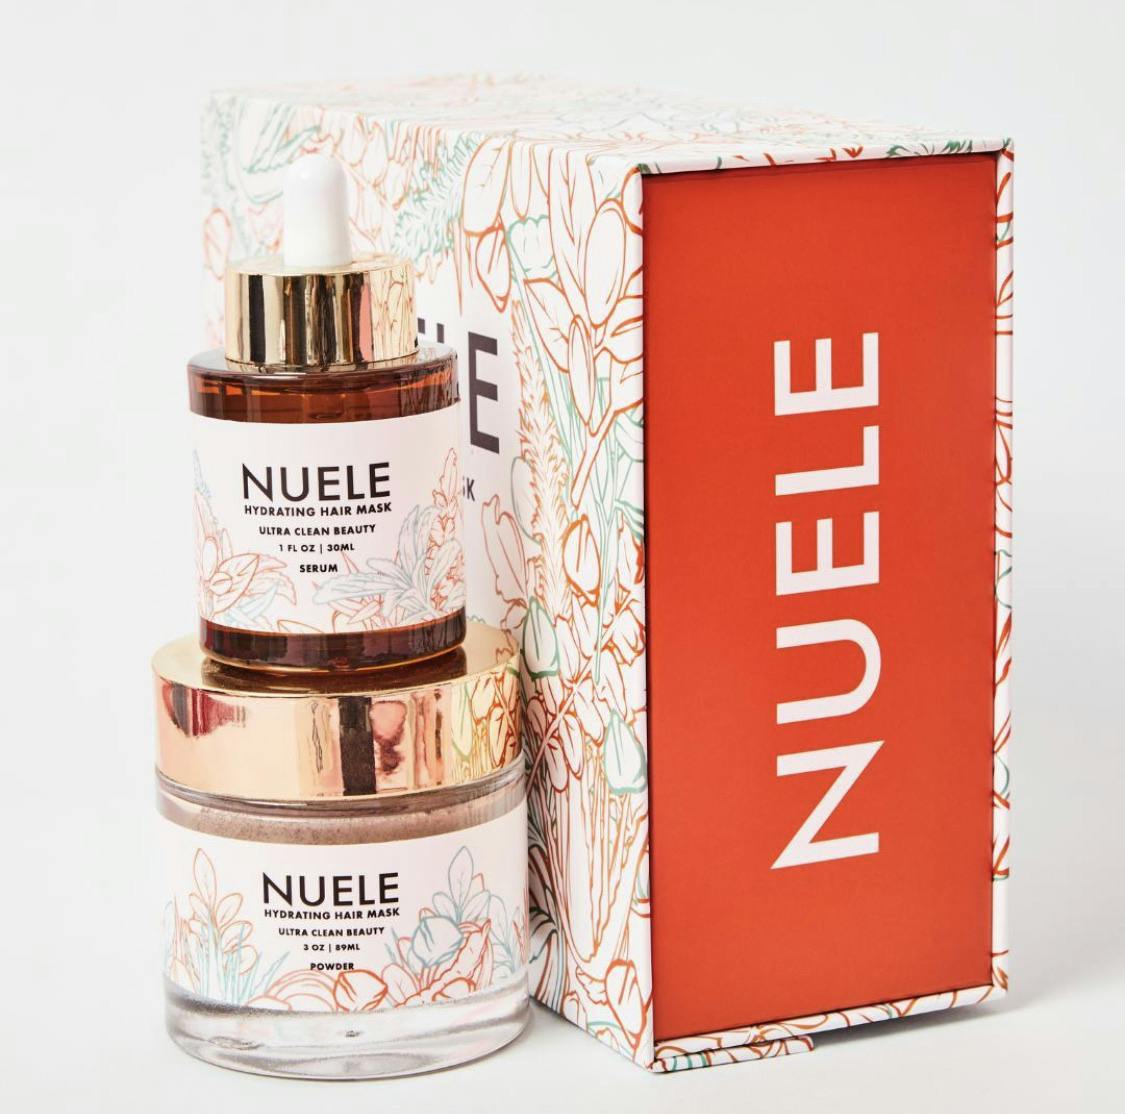 Hair mask by Nuele